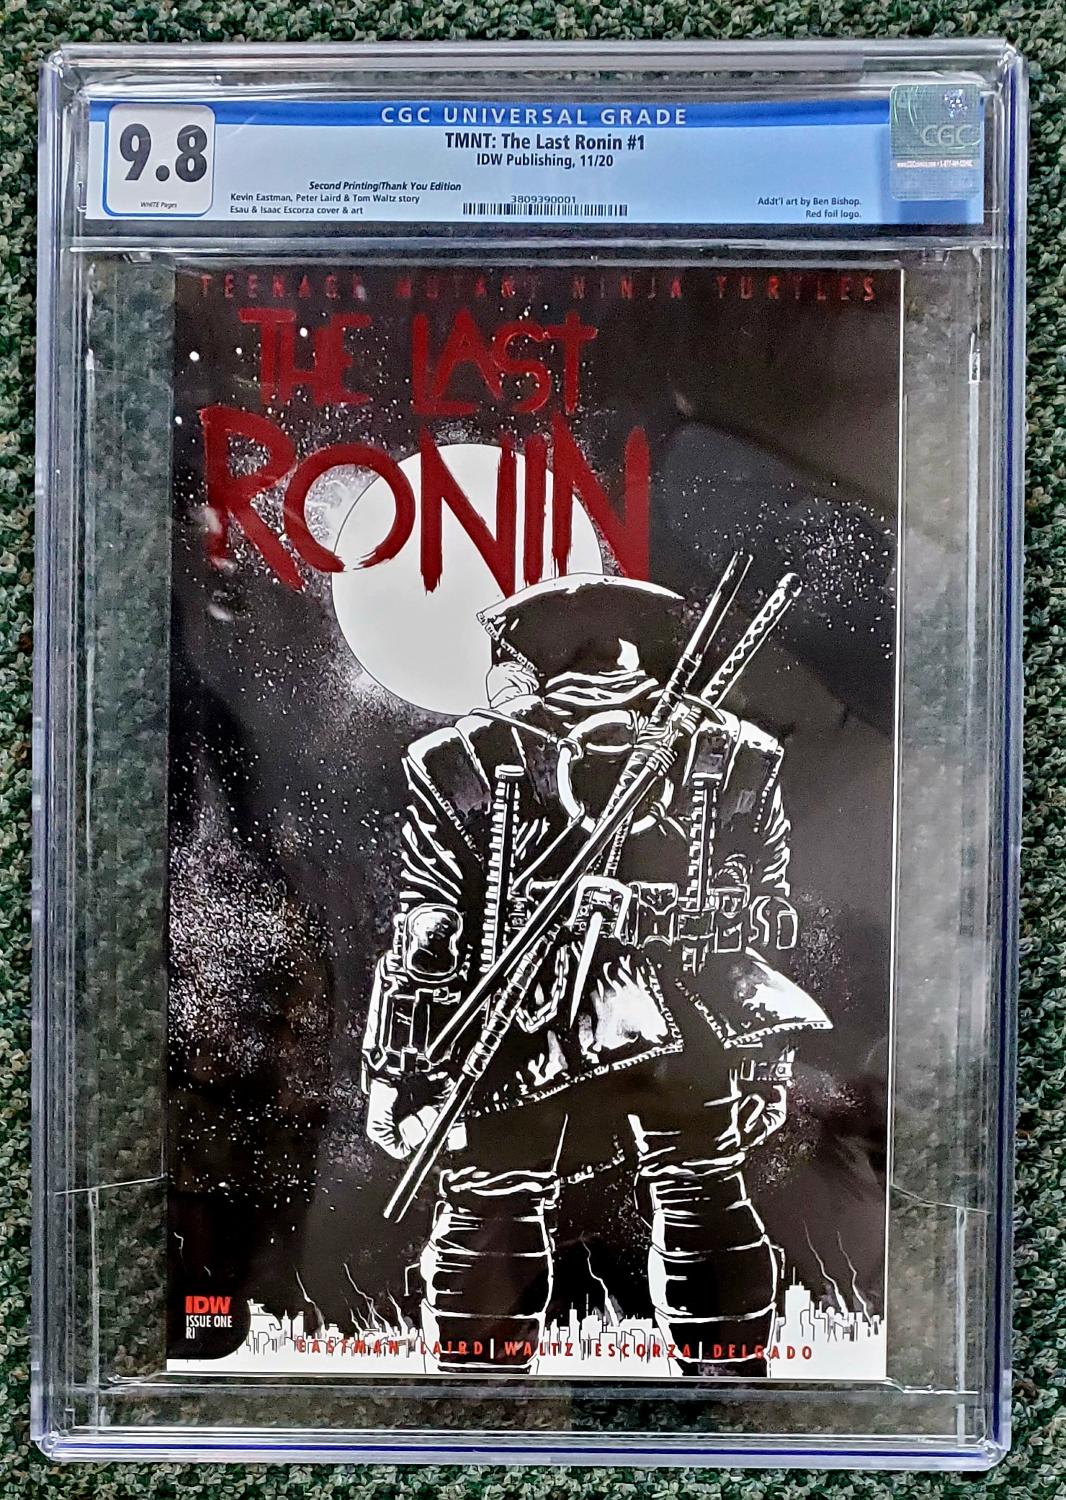 CGC-Graded 9.8 TMNT: The Last Ronin #1 Retailer Thank You Cover 1